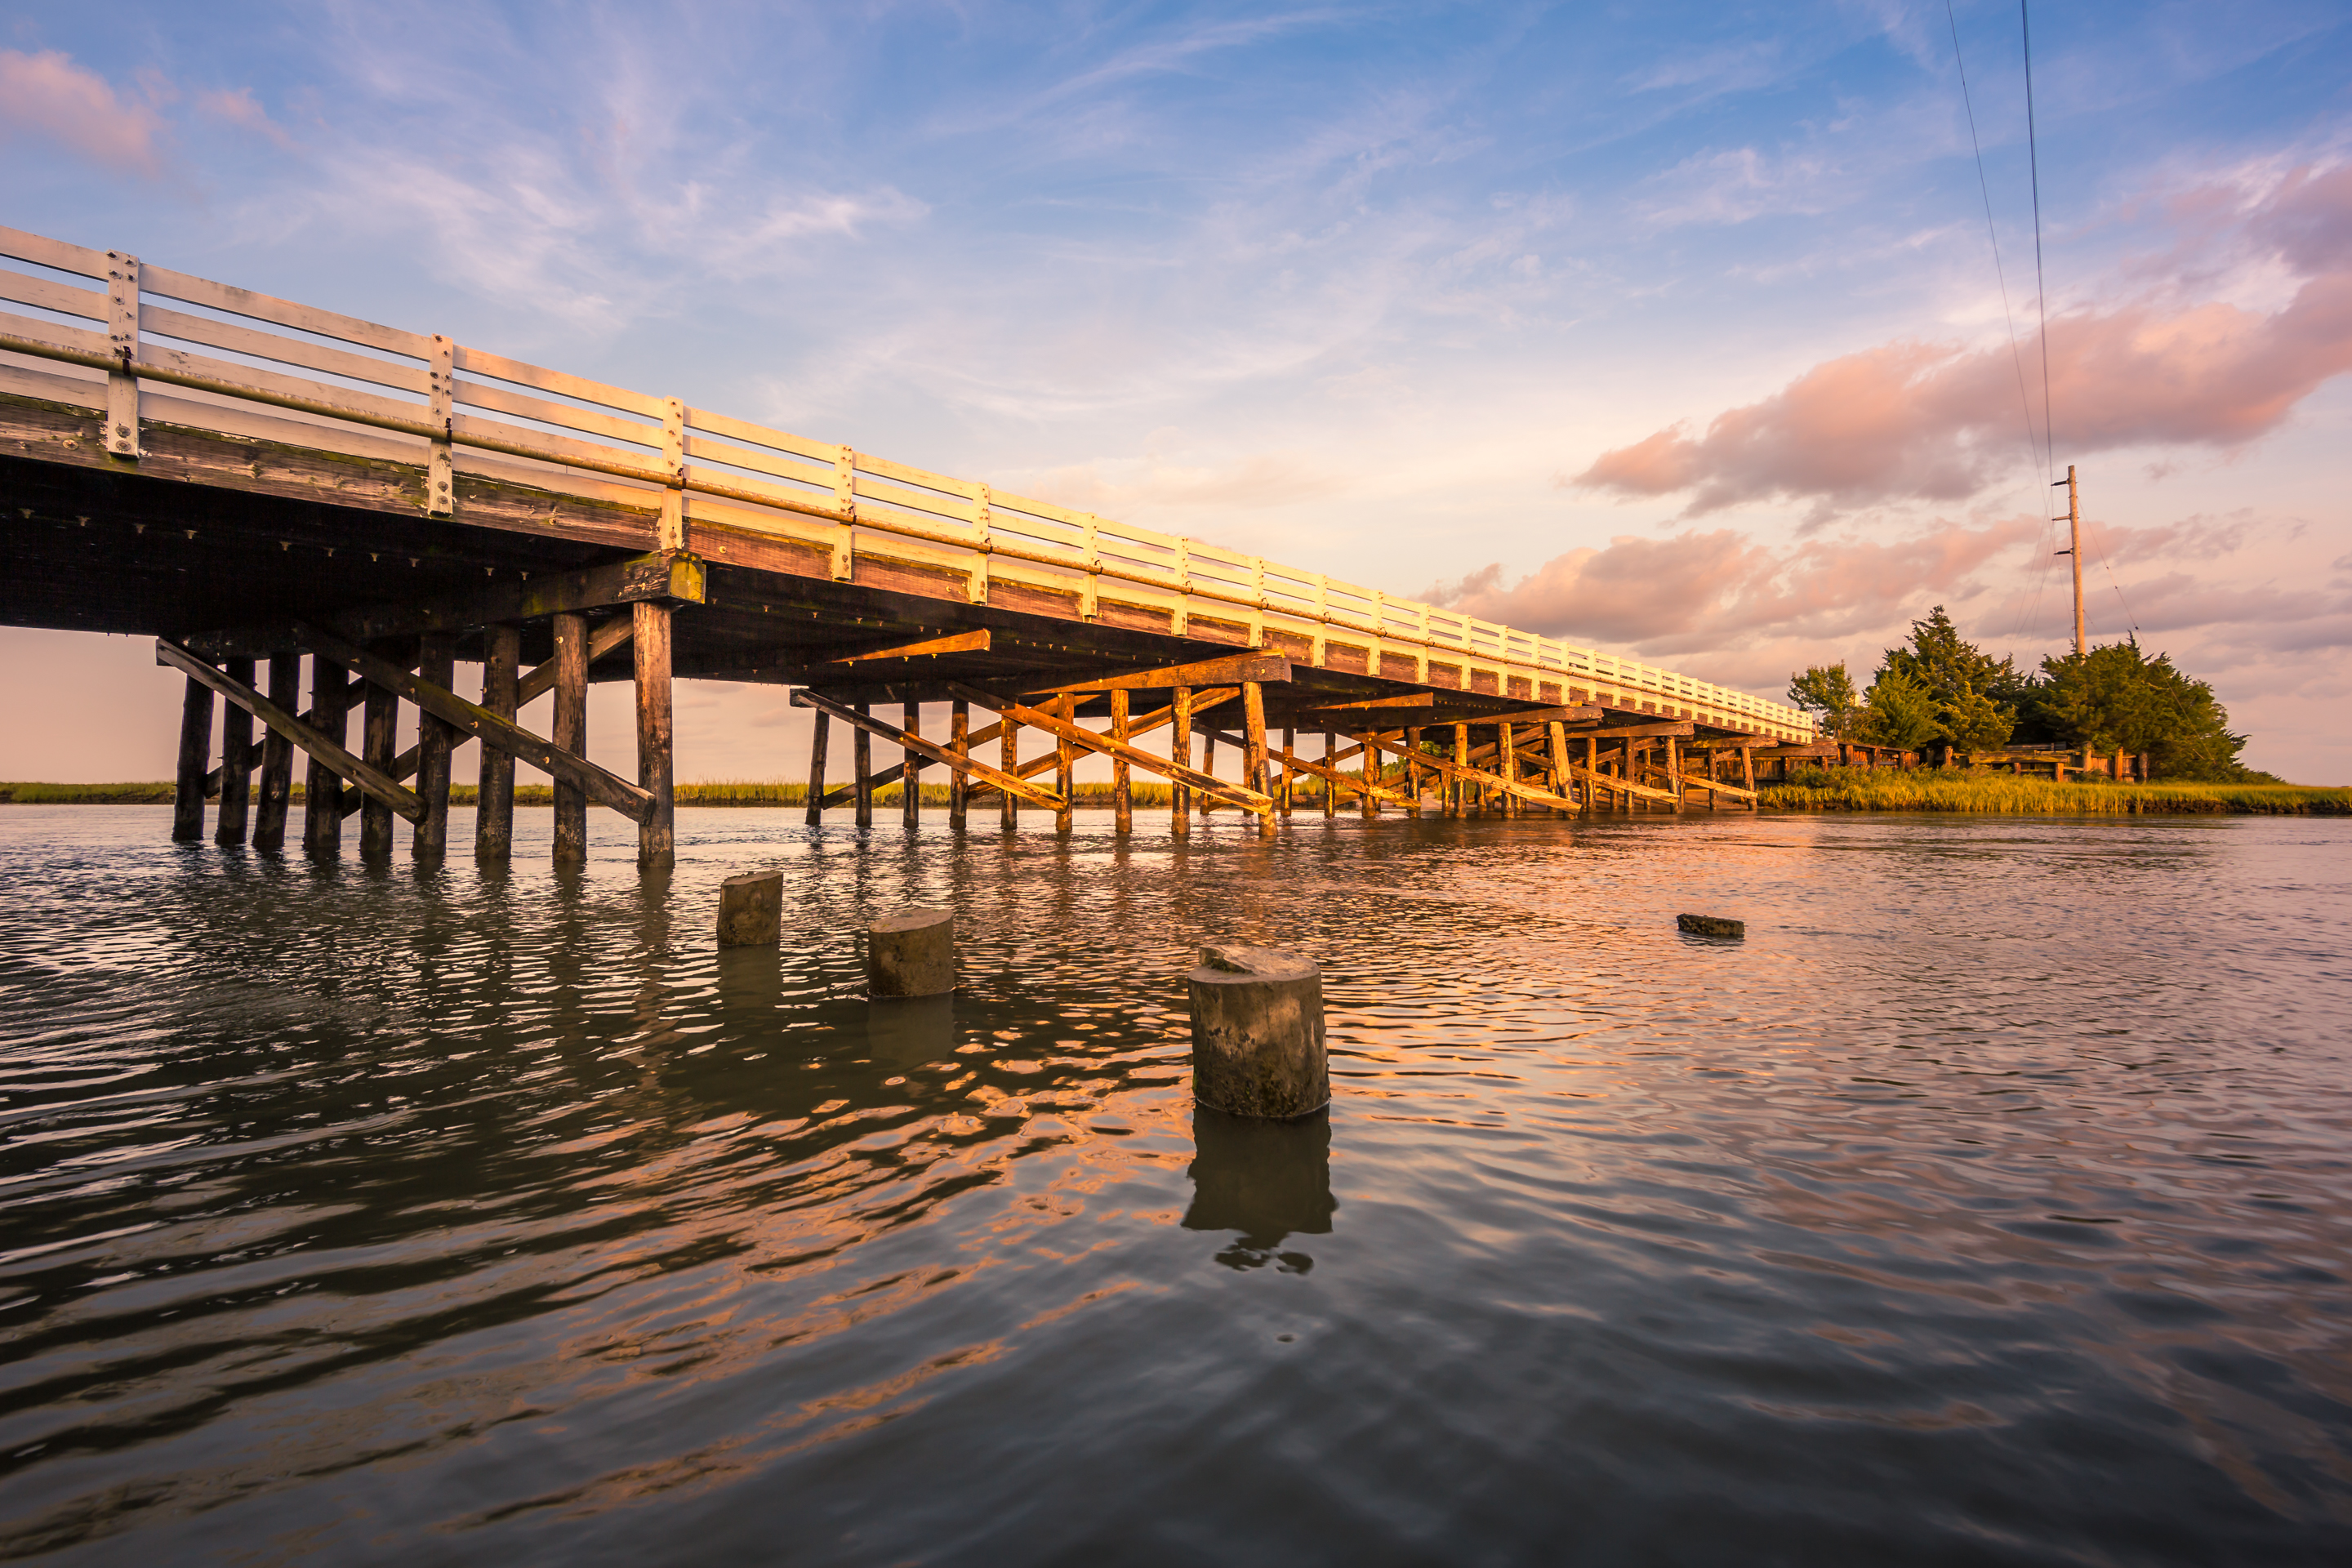 Golden hour photo of a wood bridge spanning a stretch of water.